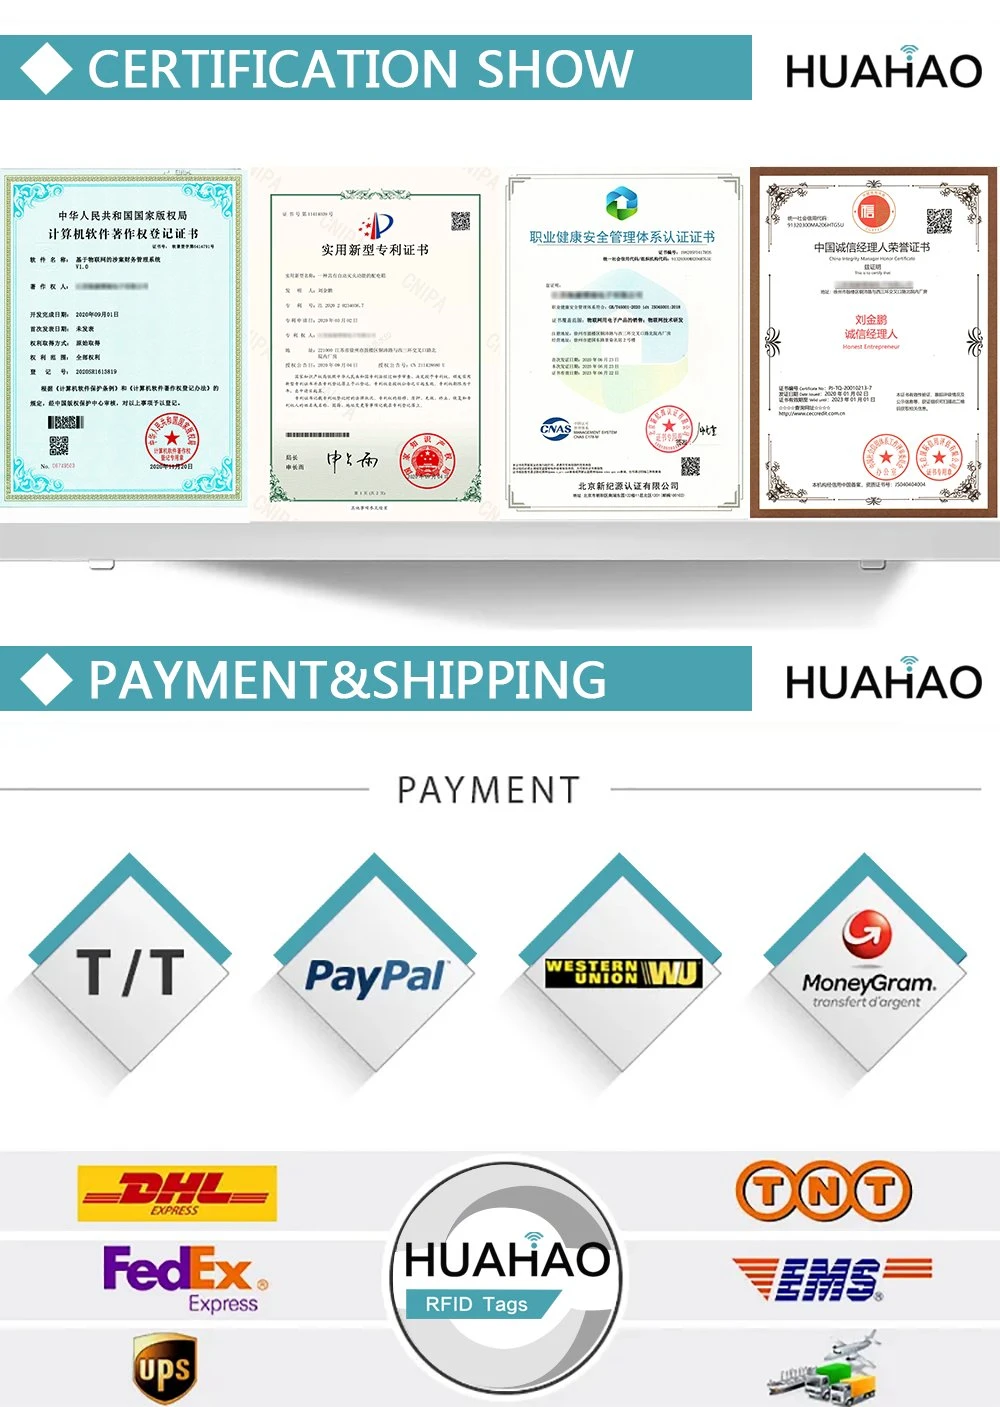 Free Sample! Huahao RFID Manufacturer Customized 13.56MHz NXP NFC Tags